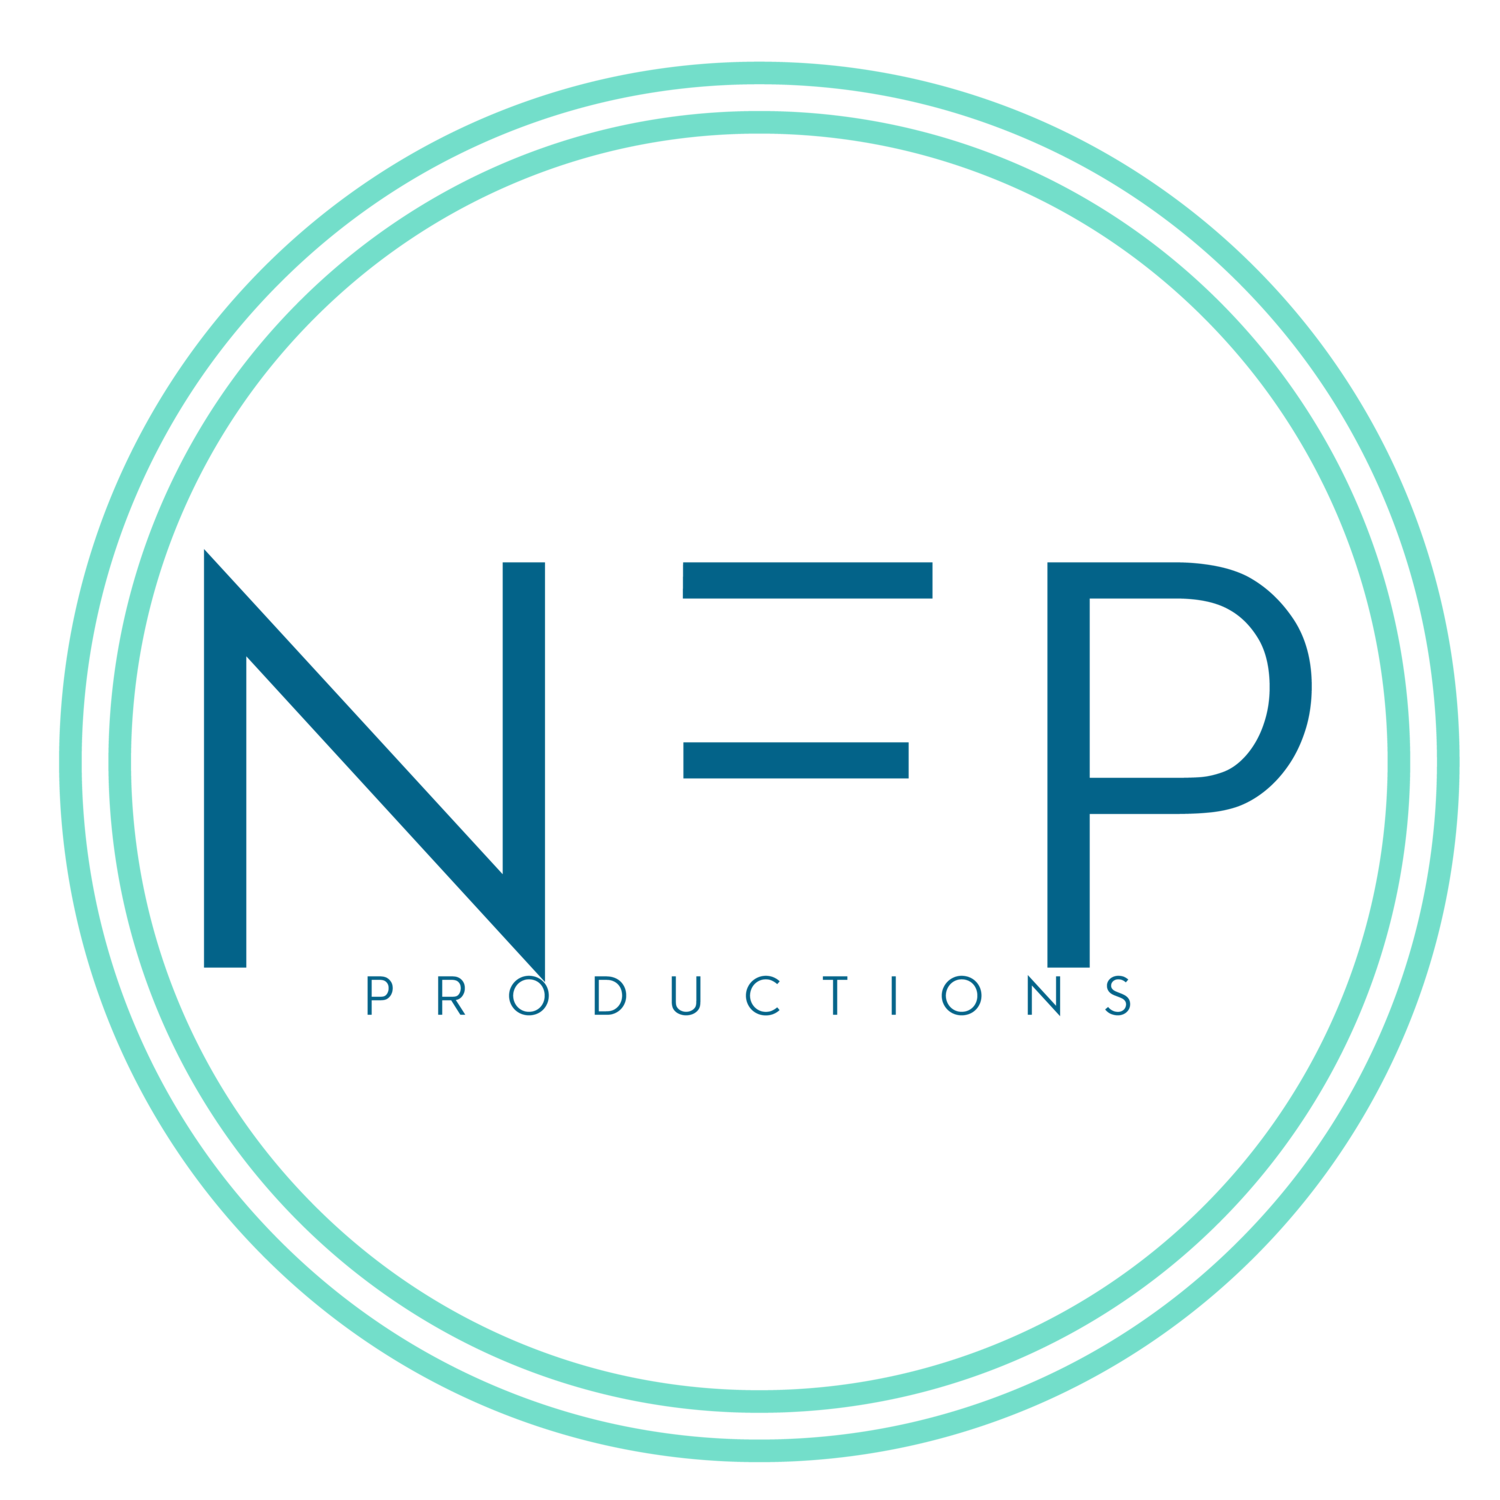 New Fiction Productions